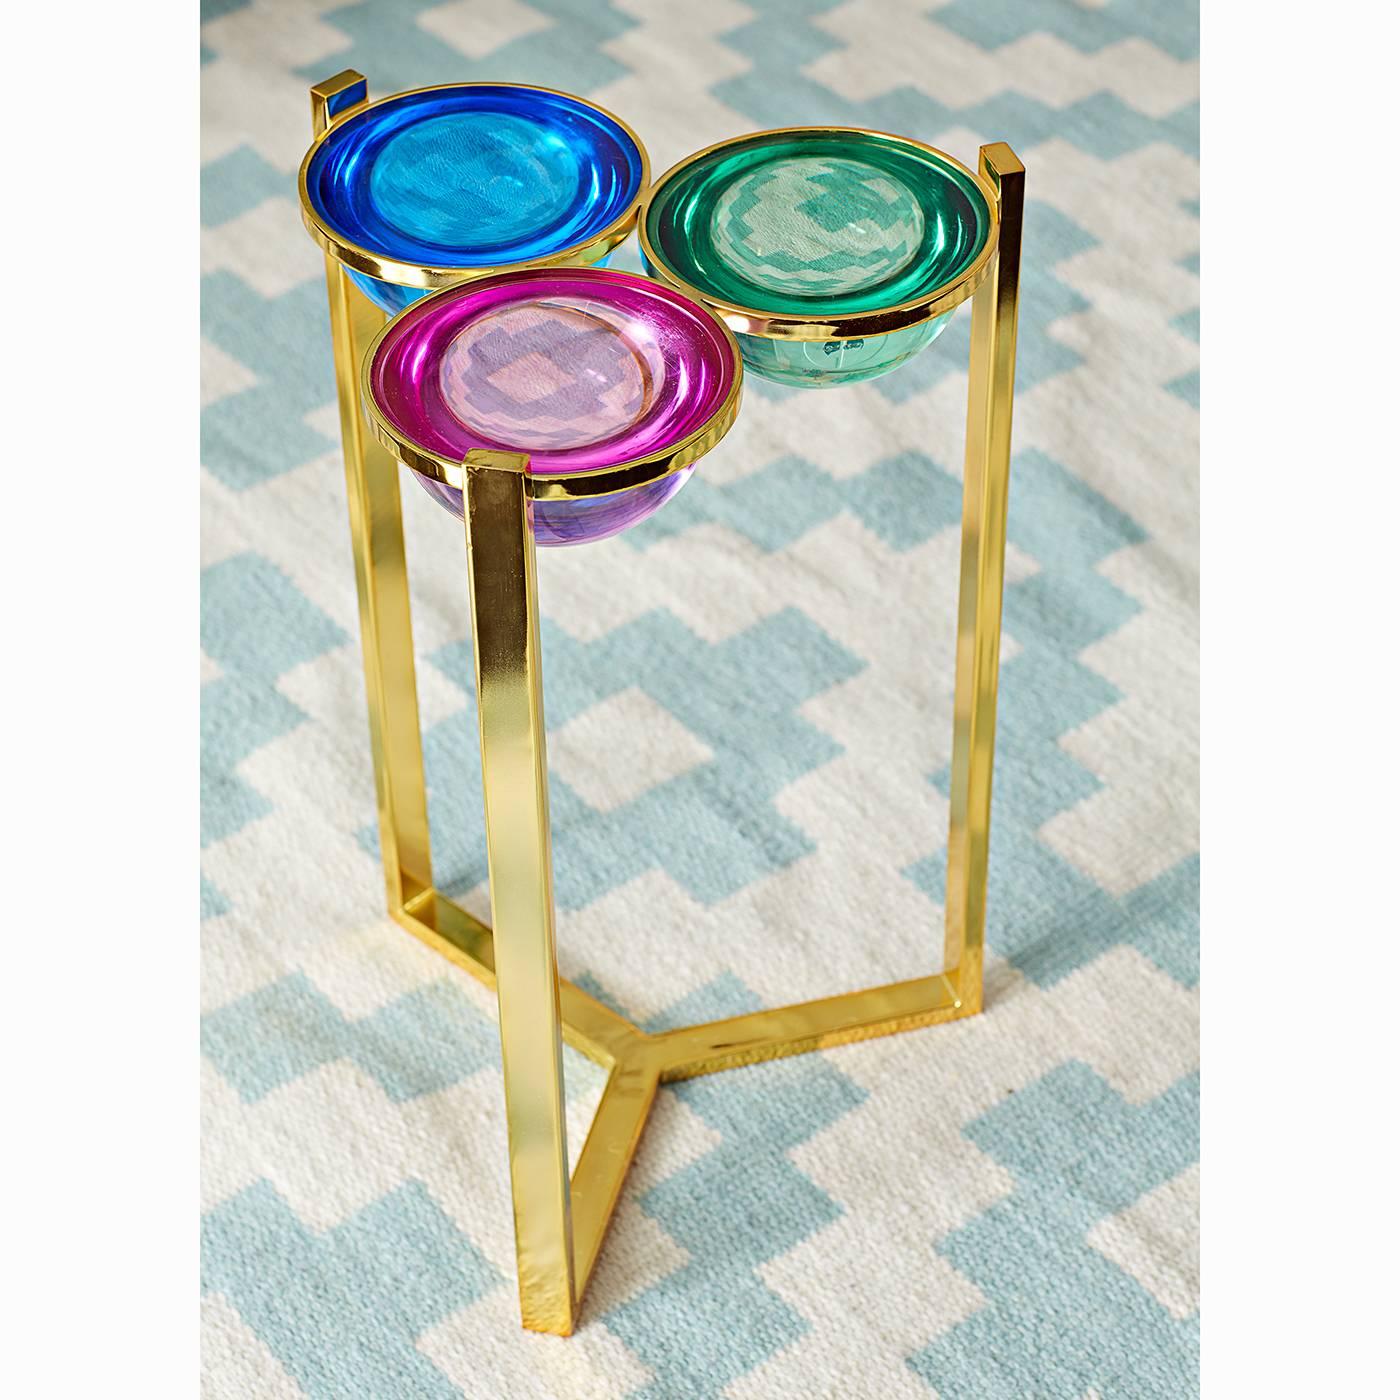 Futuristic elegance. A cocktail table as chic as your cocktail jewelry. A polished brass frame cradles cabochons of candy colored Lucite for a drinks table with dimension. Each Lucite half-sphere is set into a ring of brass. The mind-bendingly